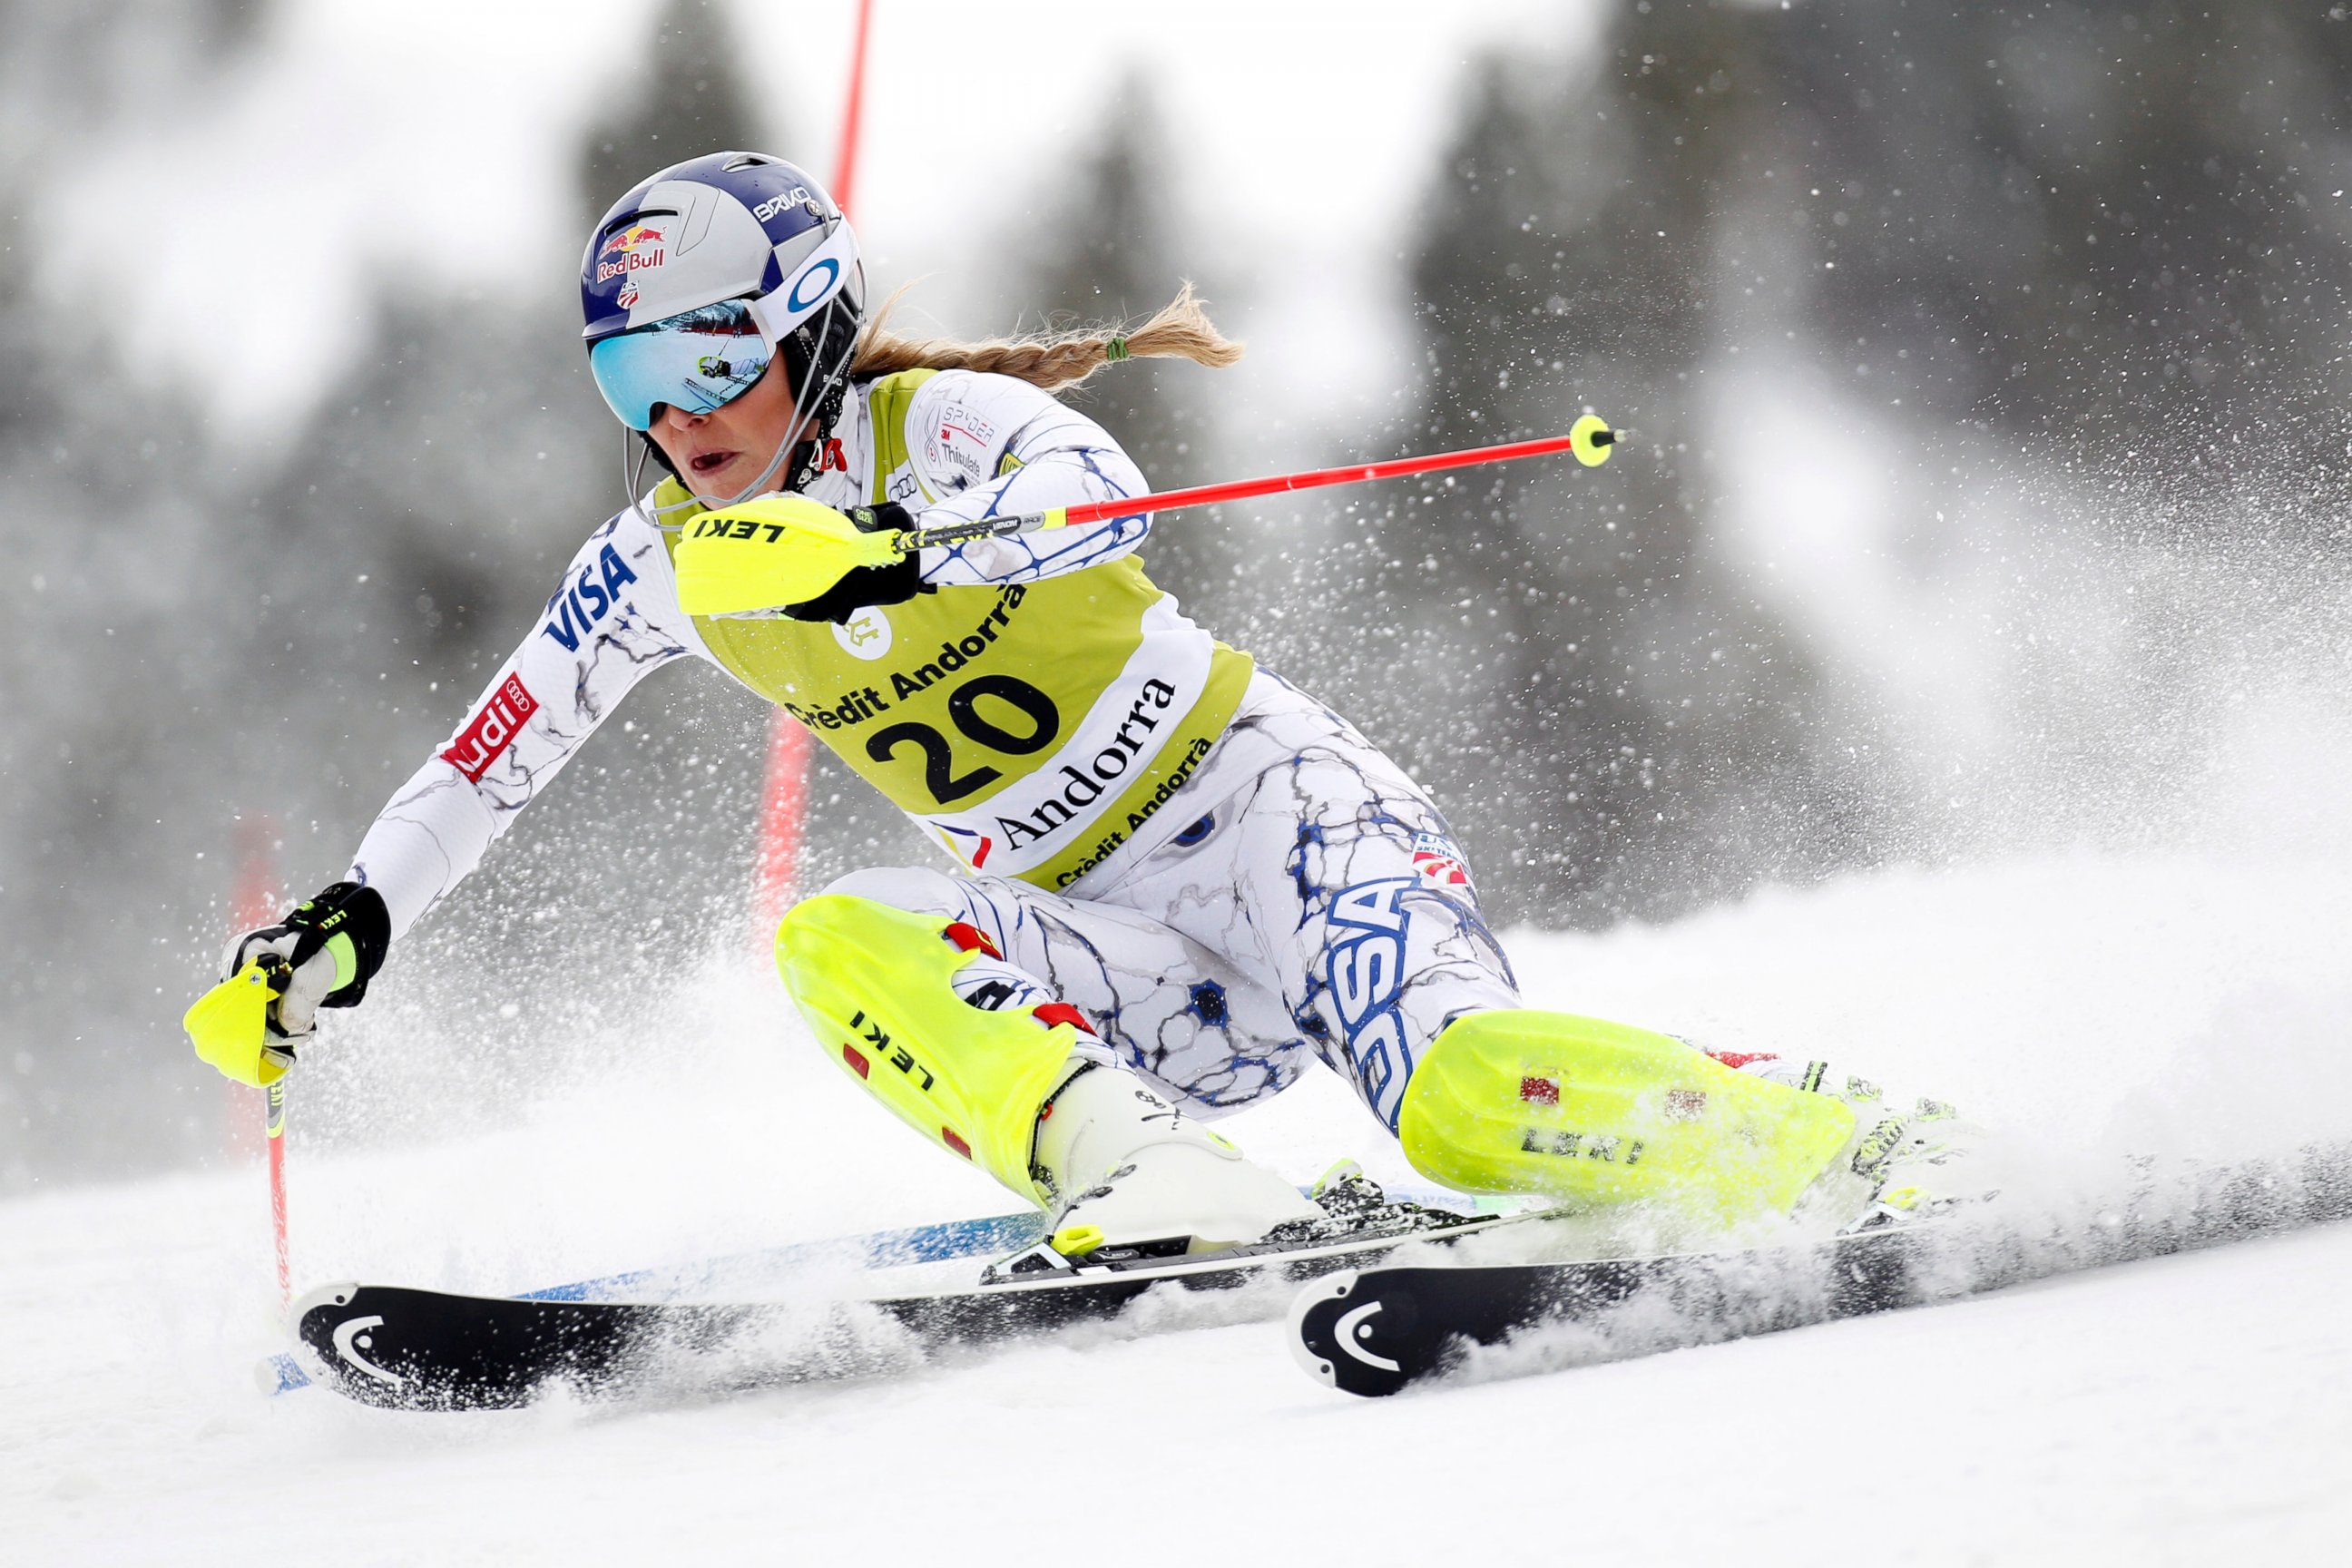 PHOTO: Lindsey Vonn competes during the Audi FIS Alpine Ski World Cup Women's Super Combined, Feb. 28, 2016 in Soldeu, Andorra. 